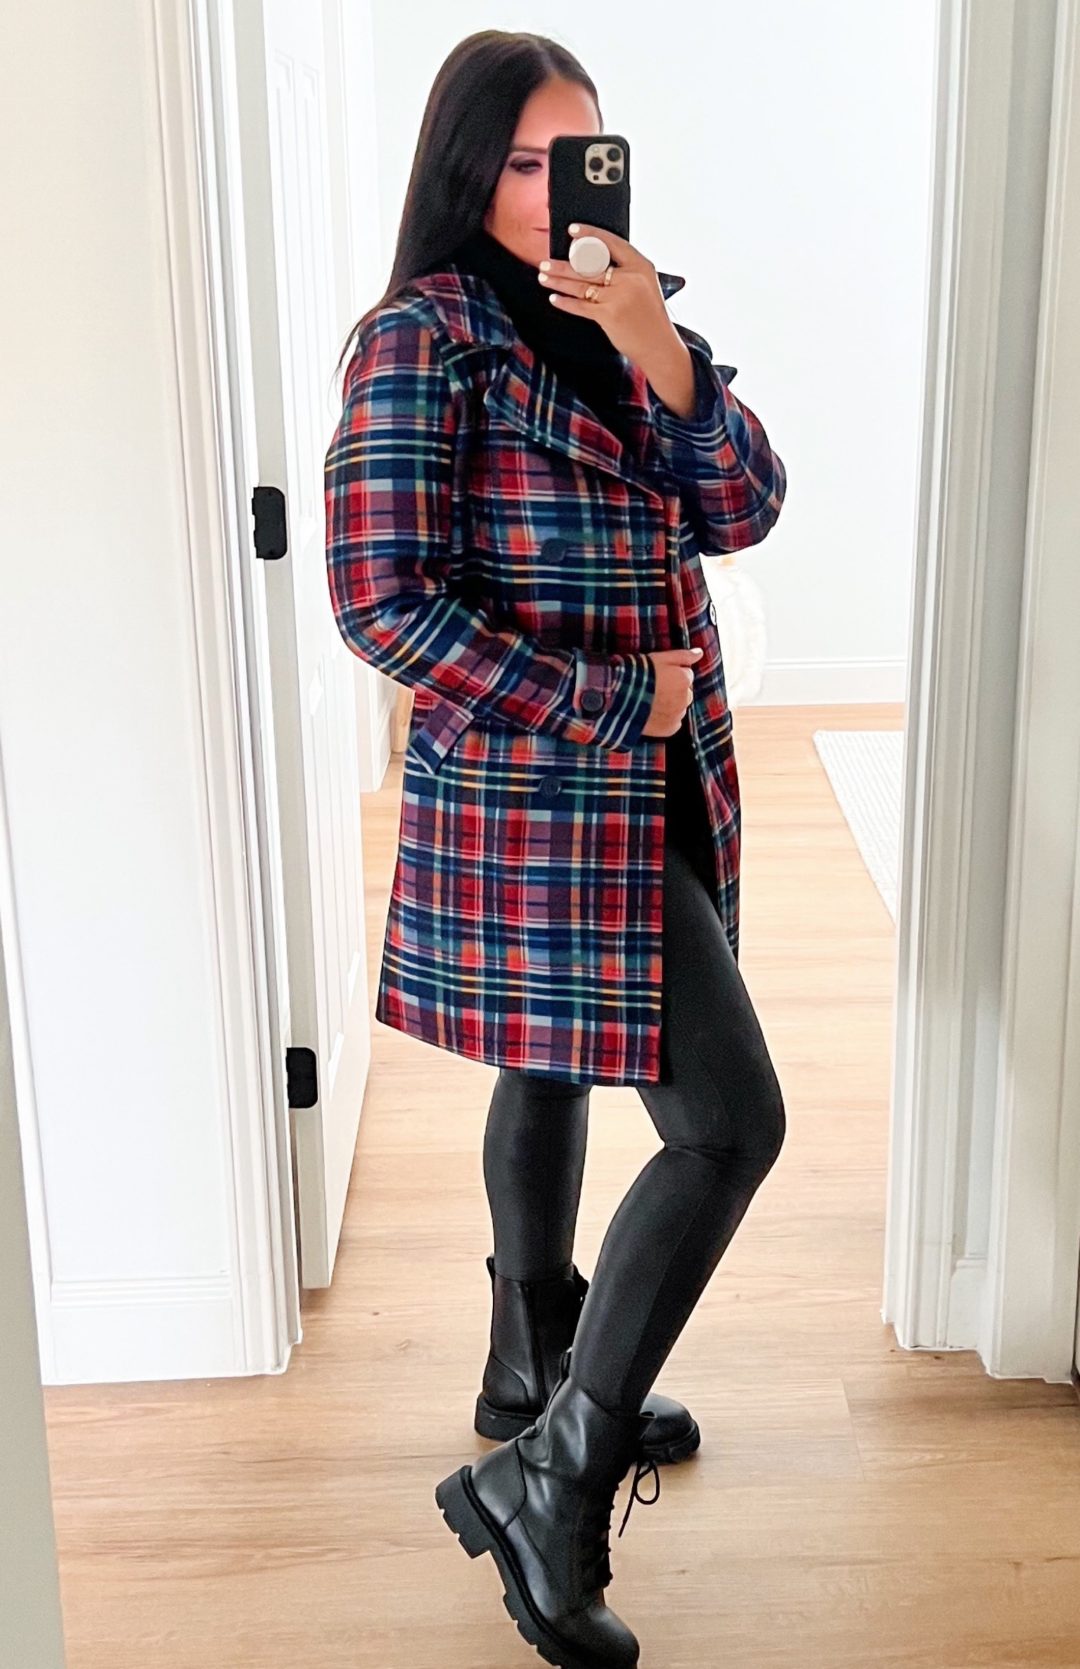 Blogger Sarah Lindner of The House of Sequins styling winter looks from Walmart Fashion.